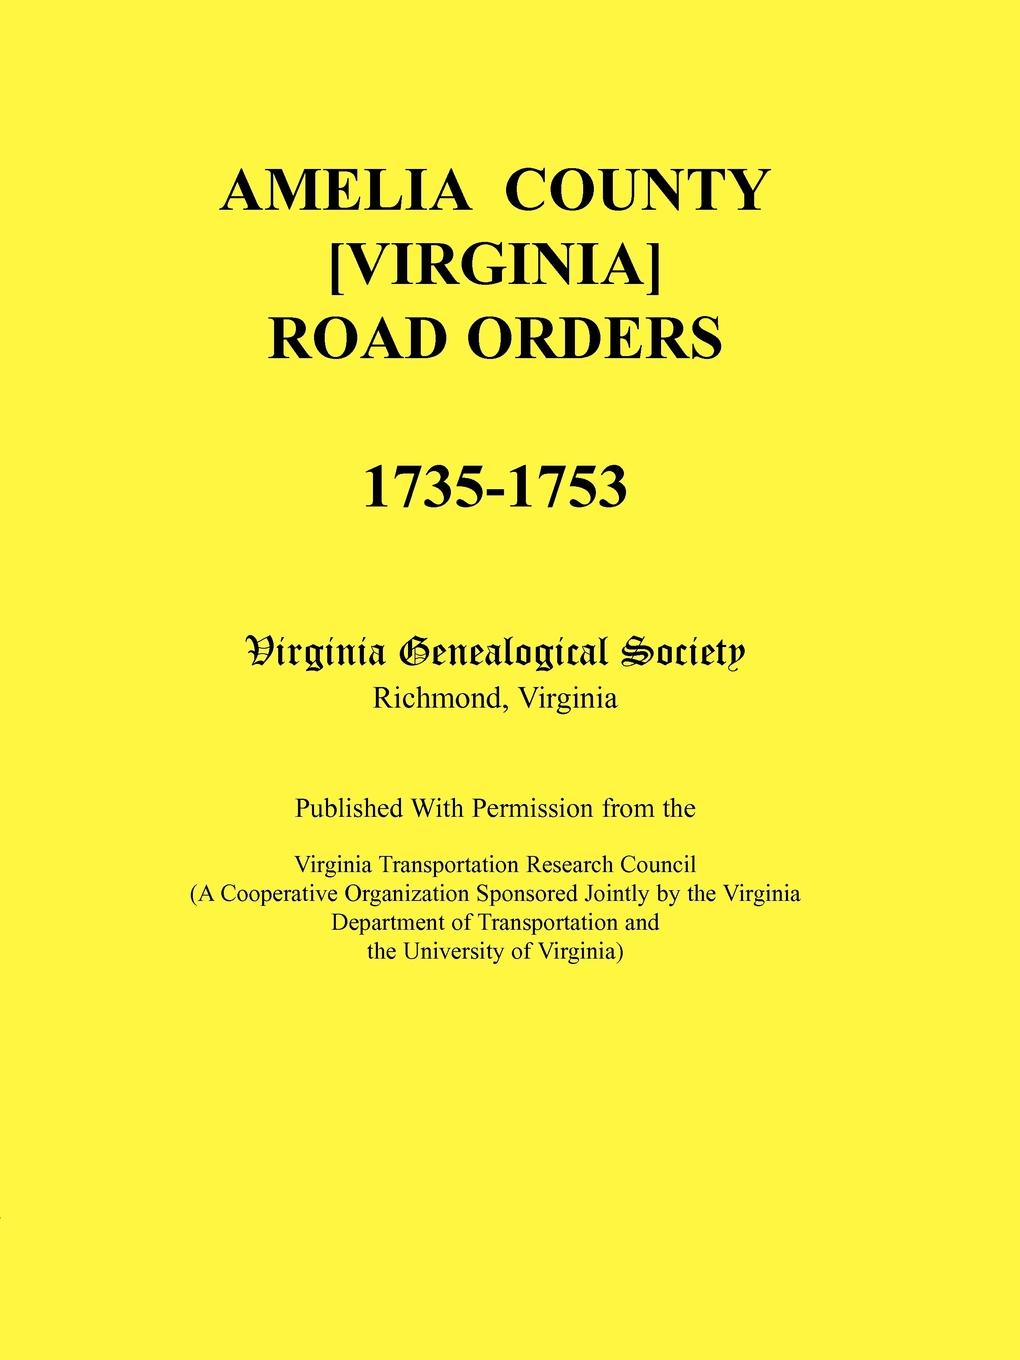 Amelia County .Virginia. Road Orders, 1735-1753. Published With Permission from the Virginia Transportation Research Council (A Cooperative Organization Sponsored Jointly by the Virginia Department of Transportation and the University of Virginia